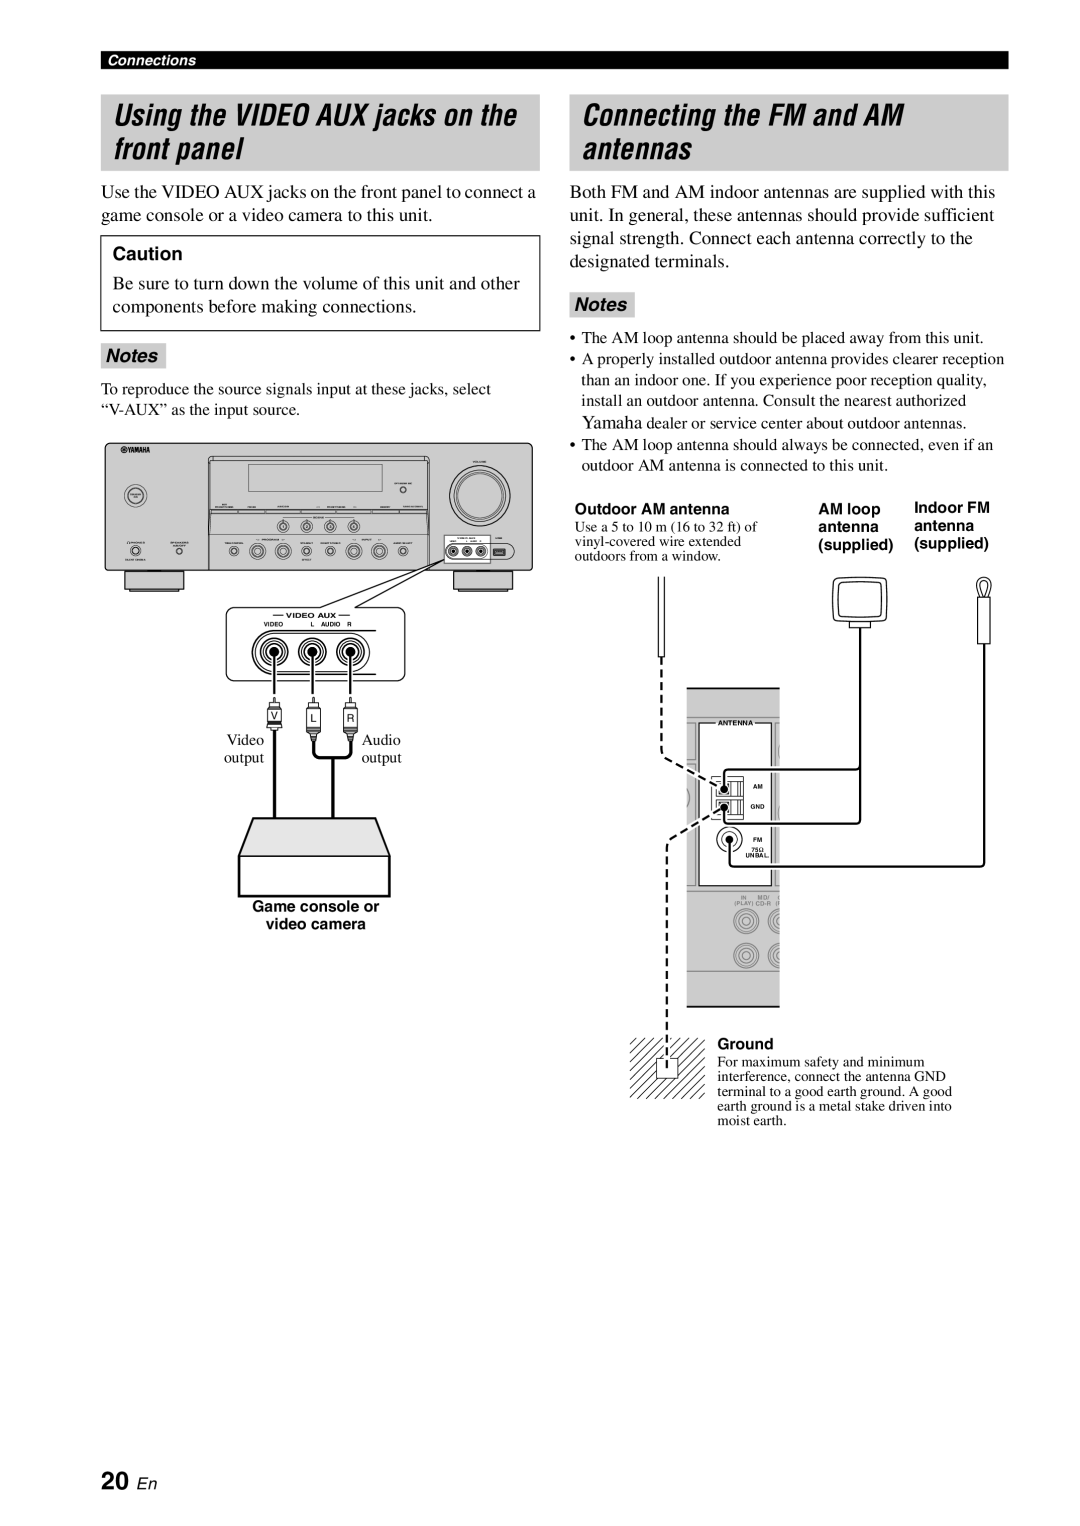 Yamaha RX-V561 owner manual Using the VIDEO AUX jacks on the front panel, Connecting the FM and AM antennas, 20 En, Notes 